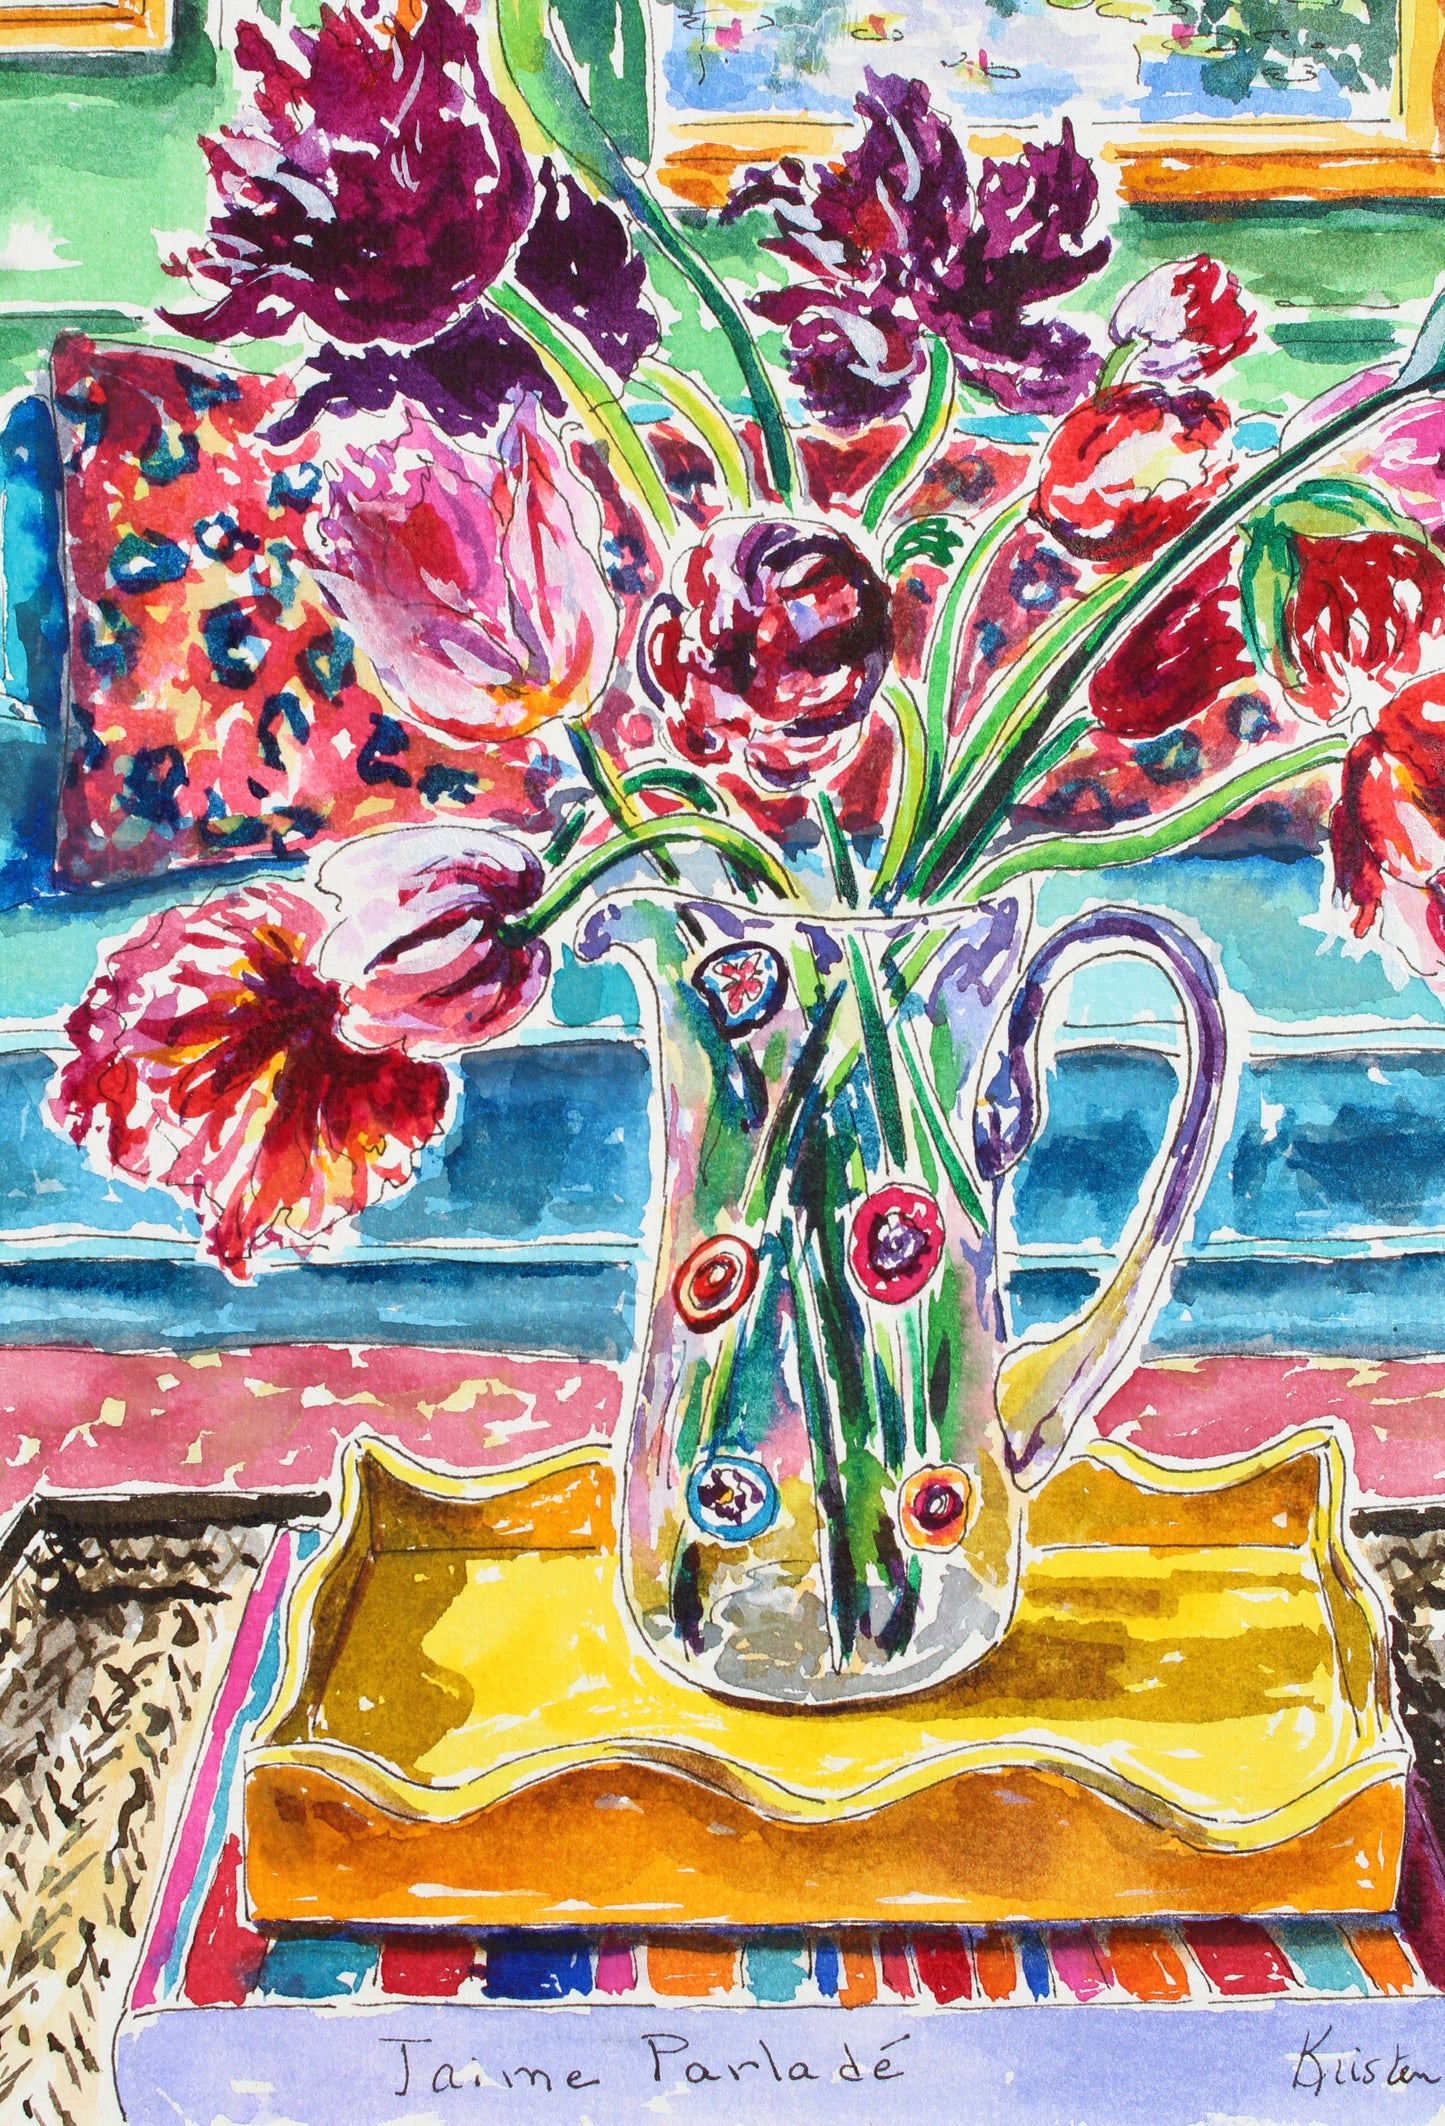 Springtime In London, An Original 12" x 9" Watercolor And Ink Interior Still Life Painting